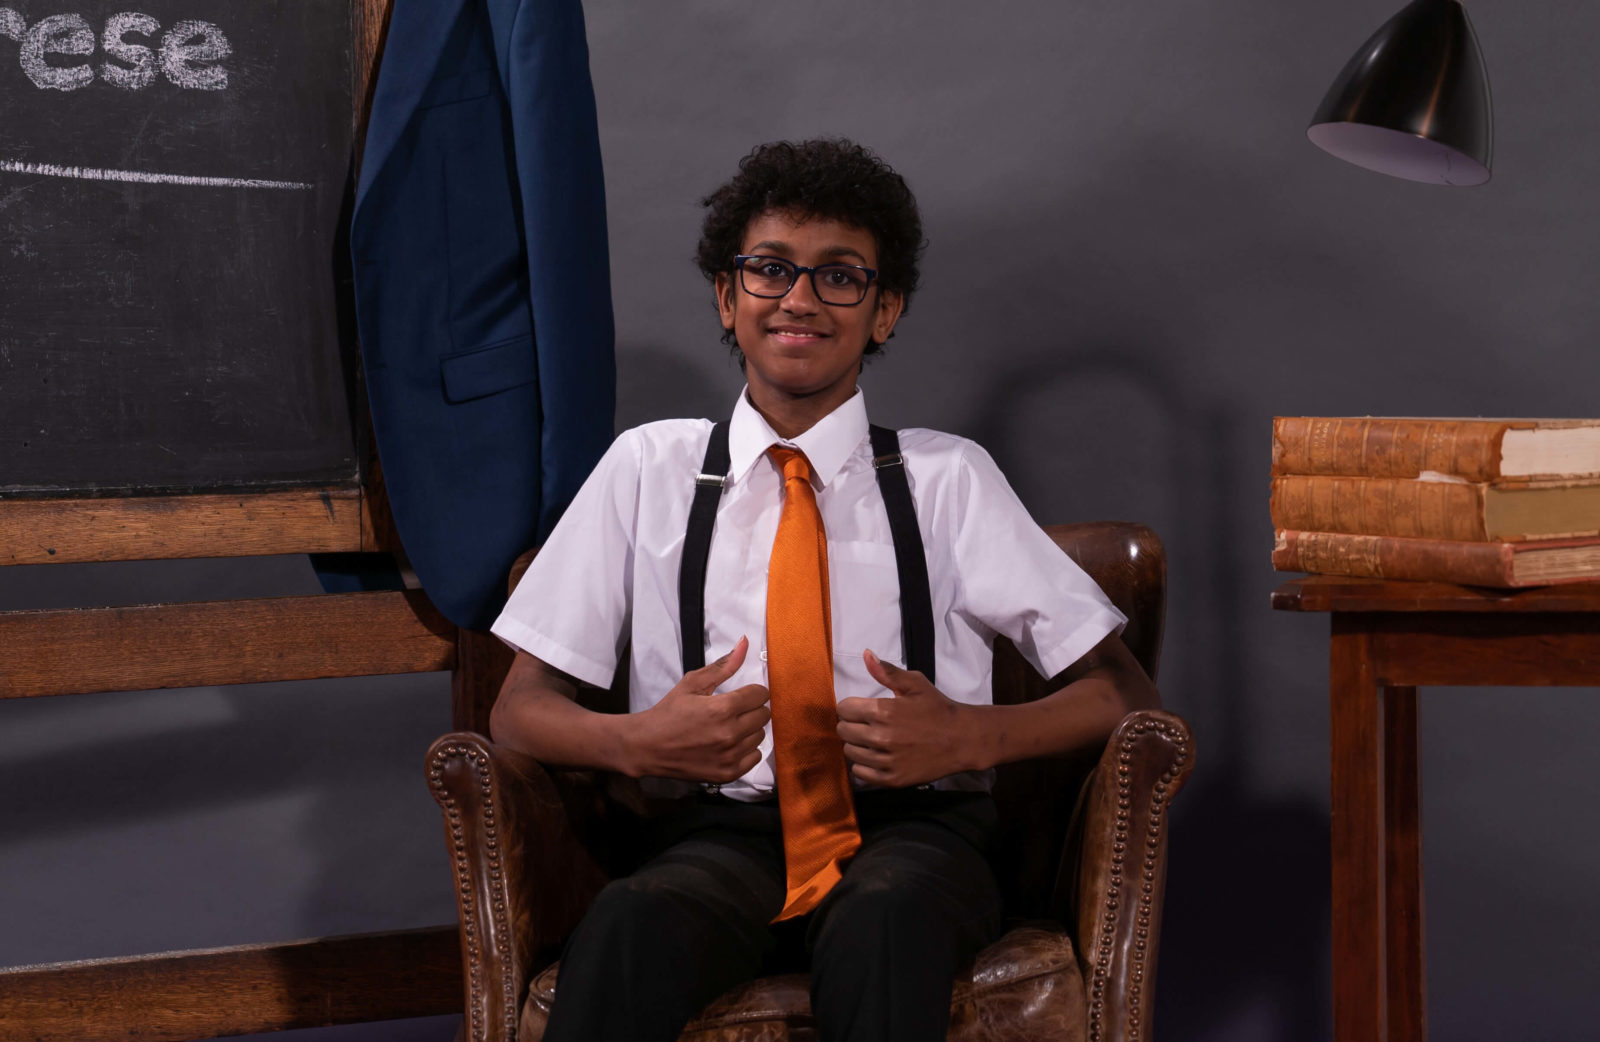 Tyrese, a young boy, waiting in a chair to teach sign language